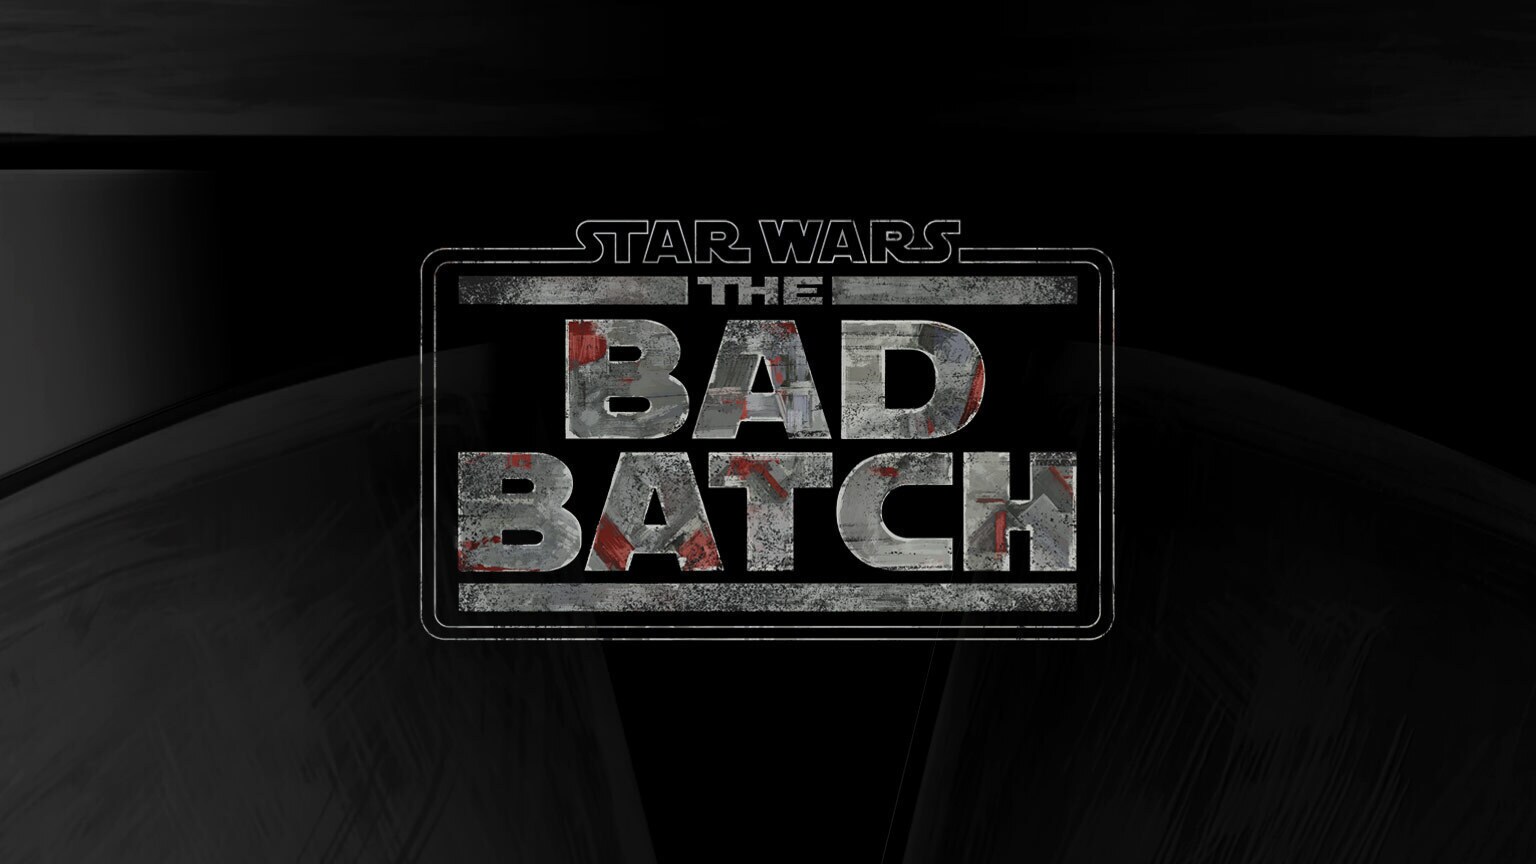 Star Wars: The Bad Batch, An All-New Animated Series, to Debut on Disney+ in 2021